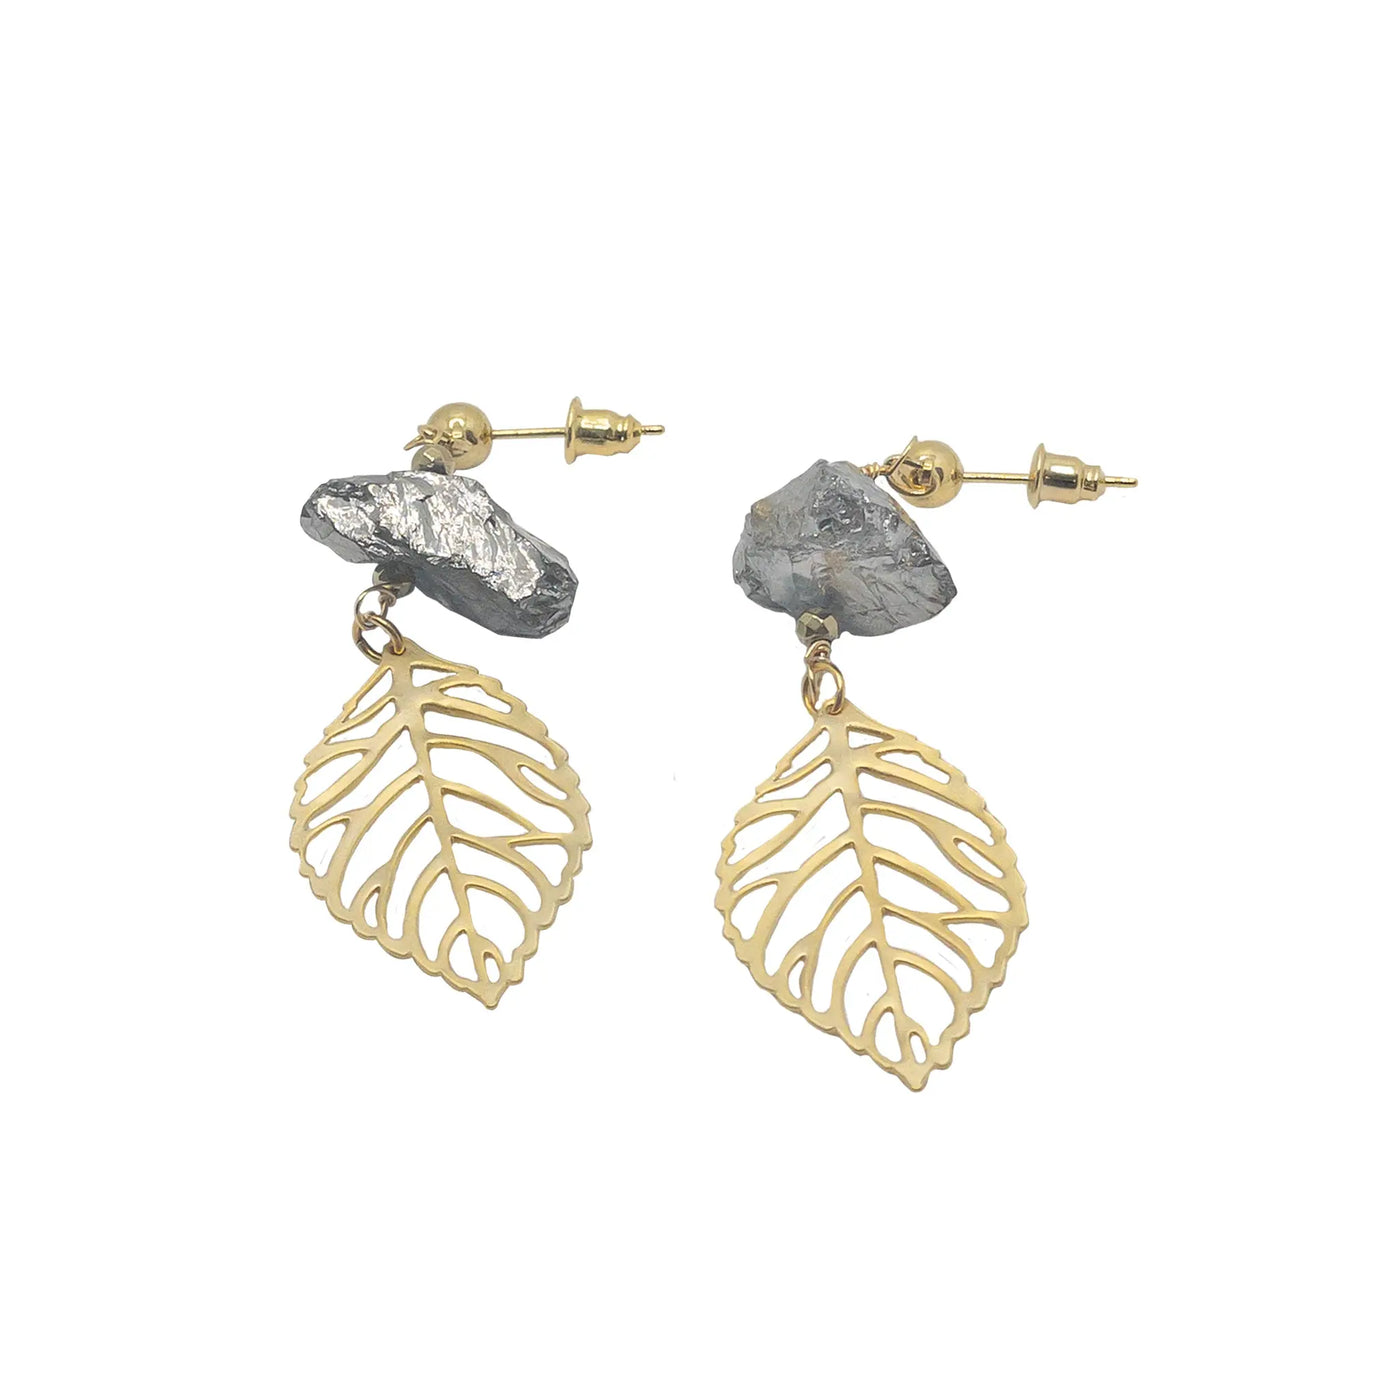 The Wild Earrings LaCkore Couture